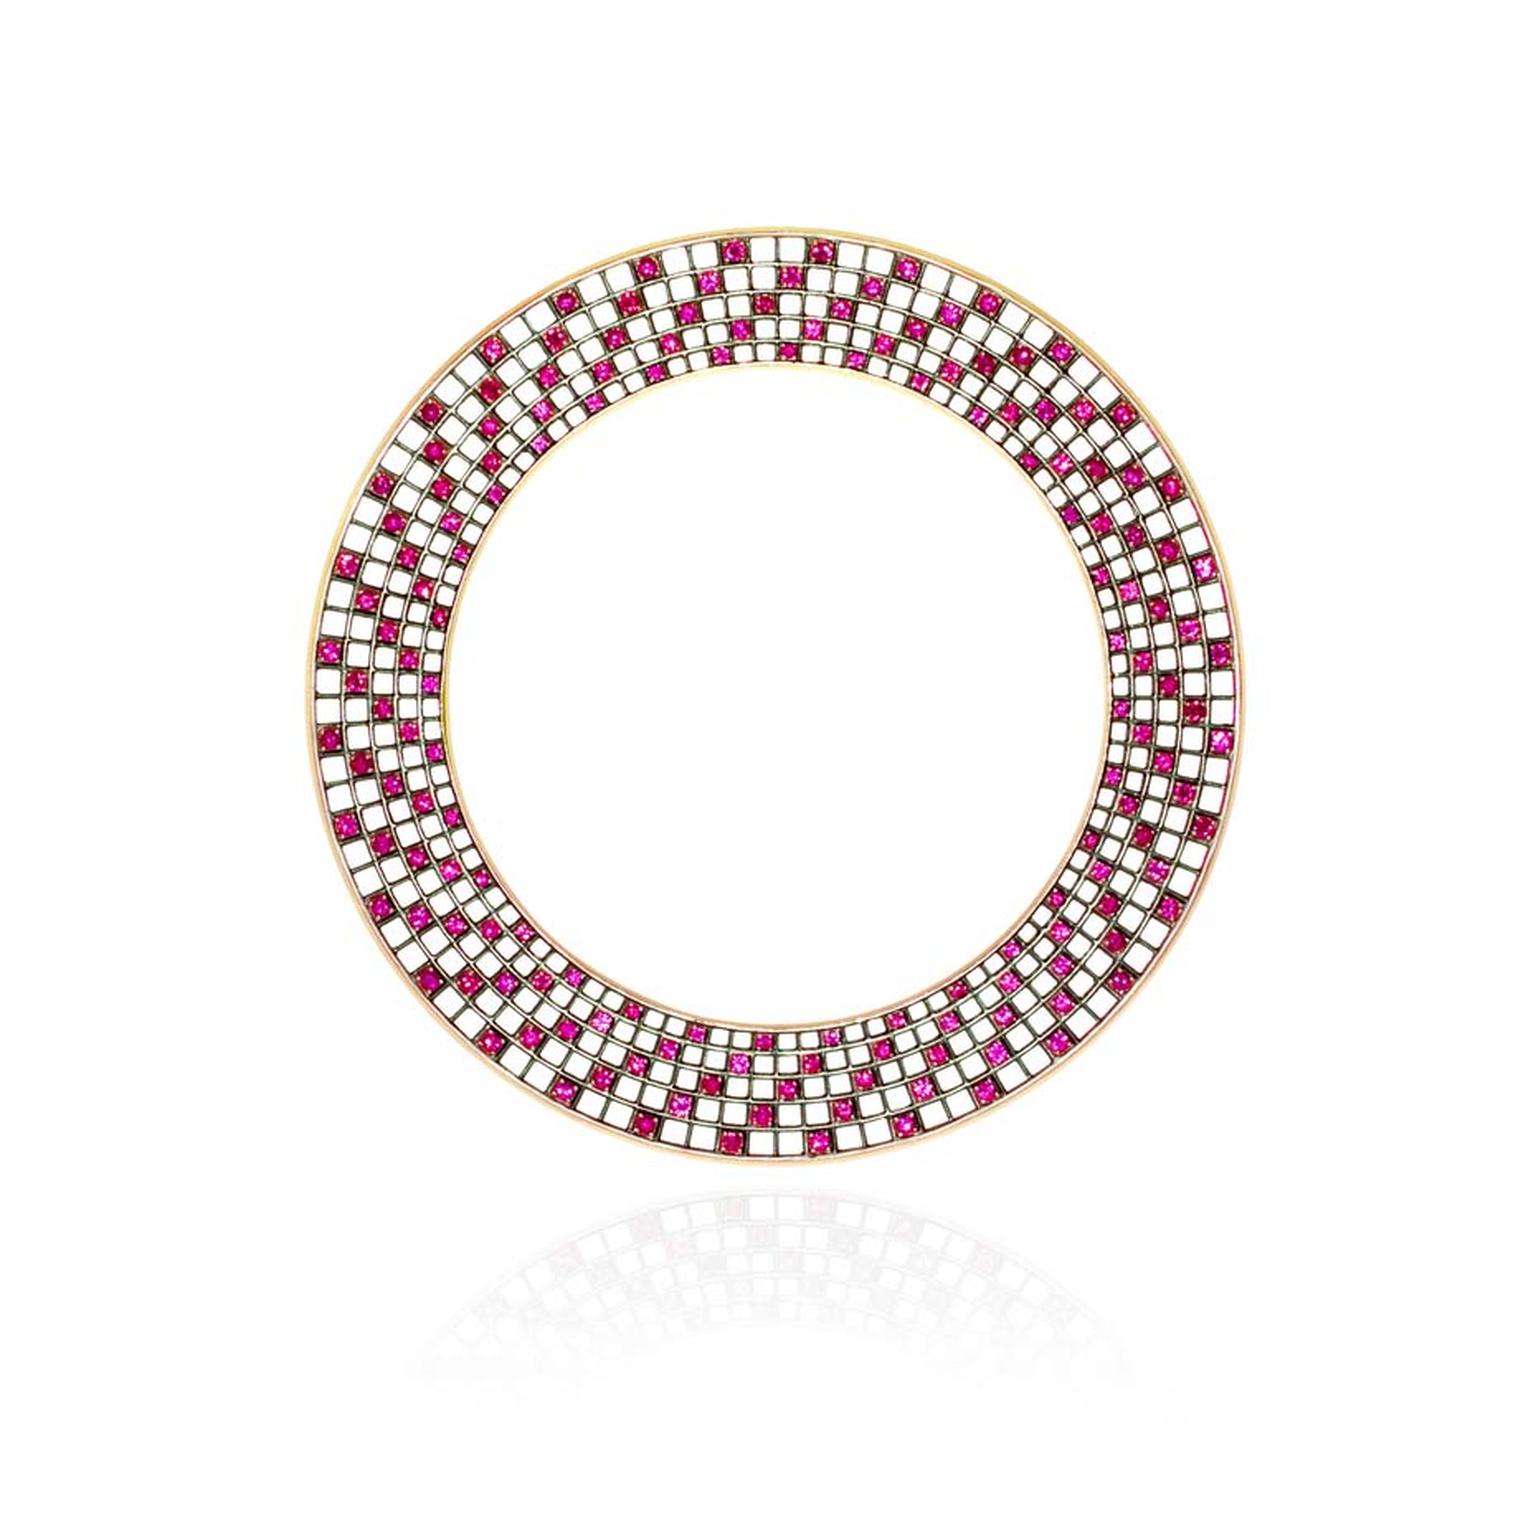 Roule & Co Spiral Halo bangle with rubies in blackened gold.